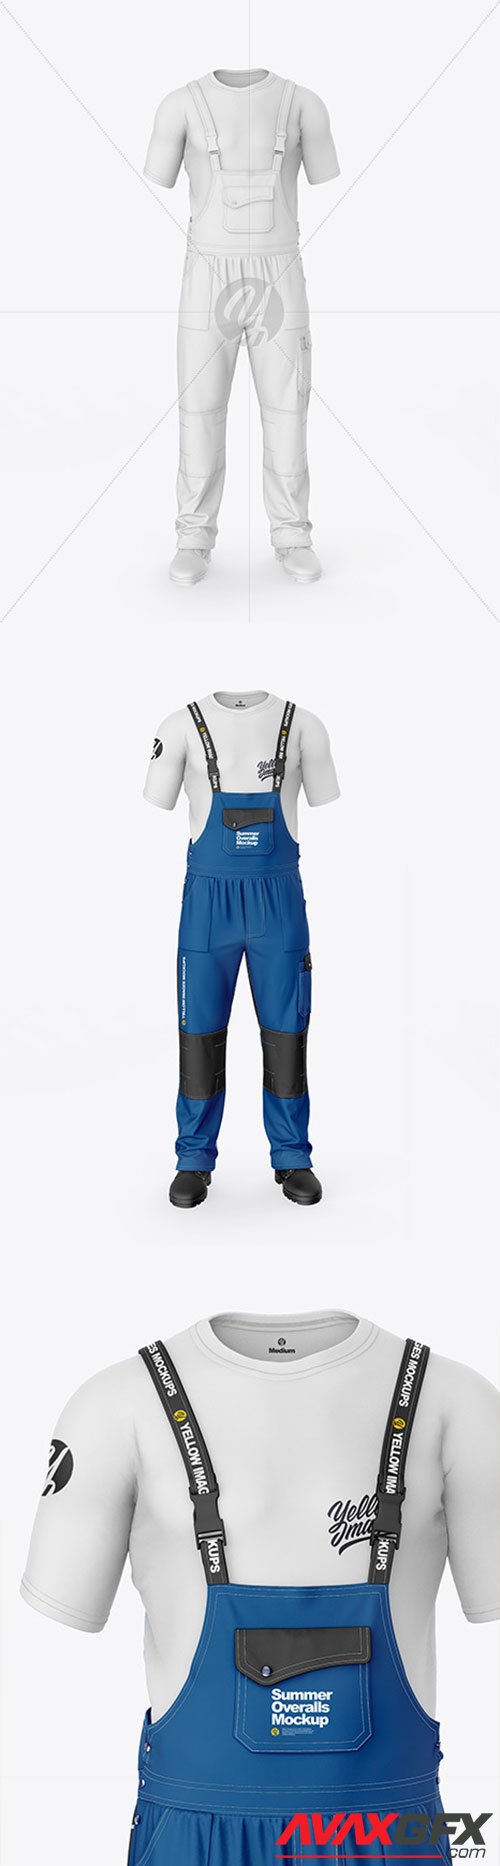 Working Summer Overalls Mockup – Front View 65539 » AVAXGFX - All